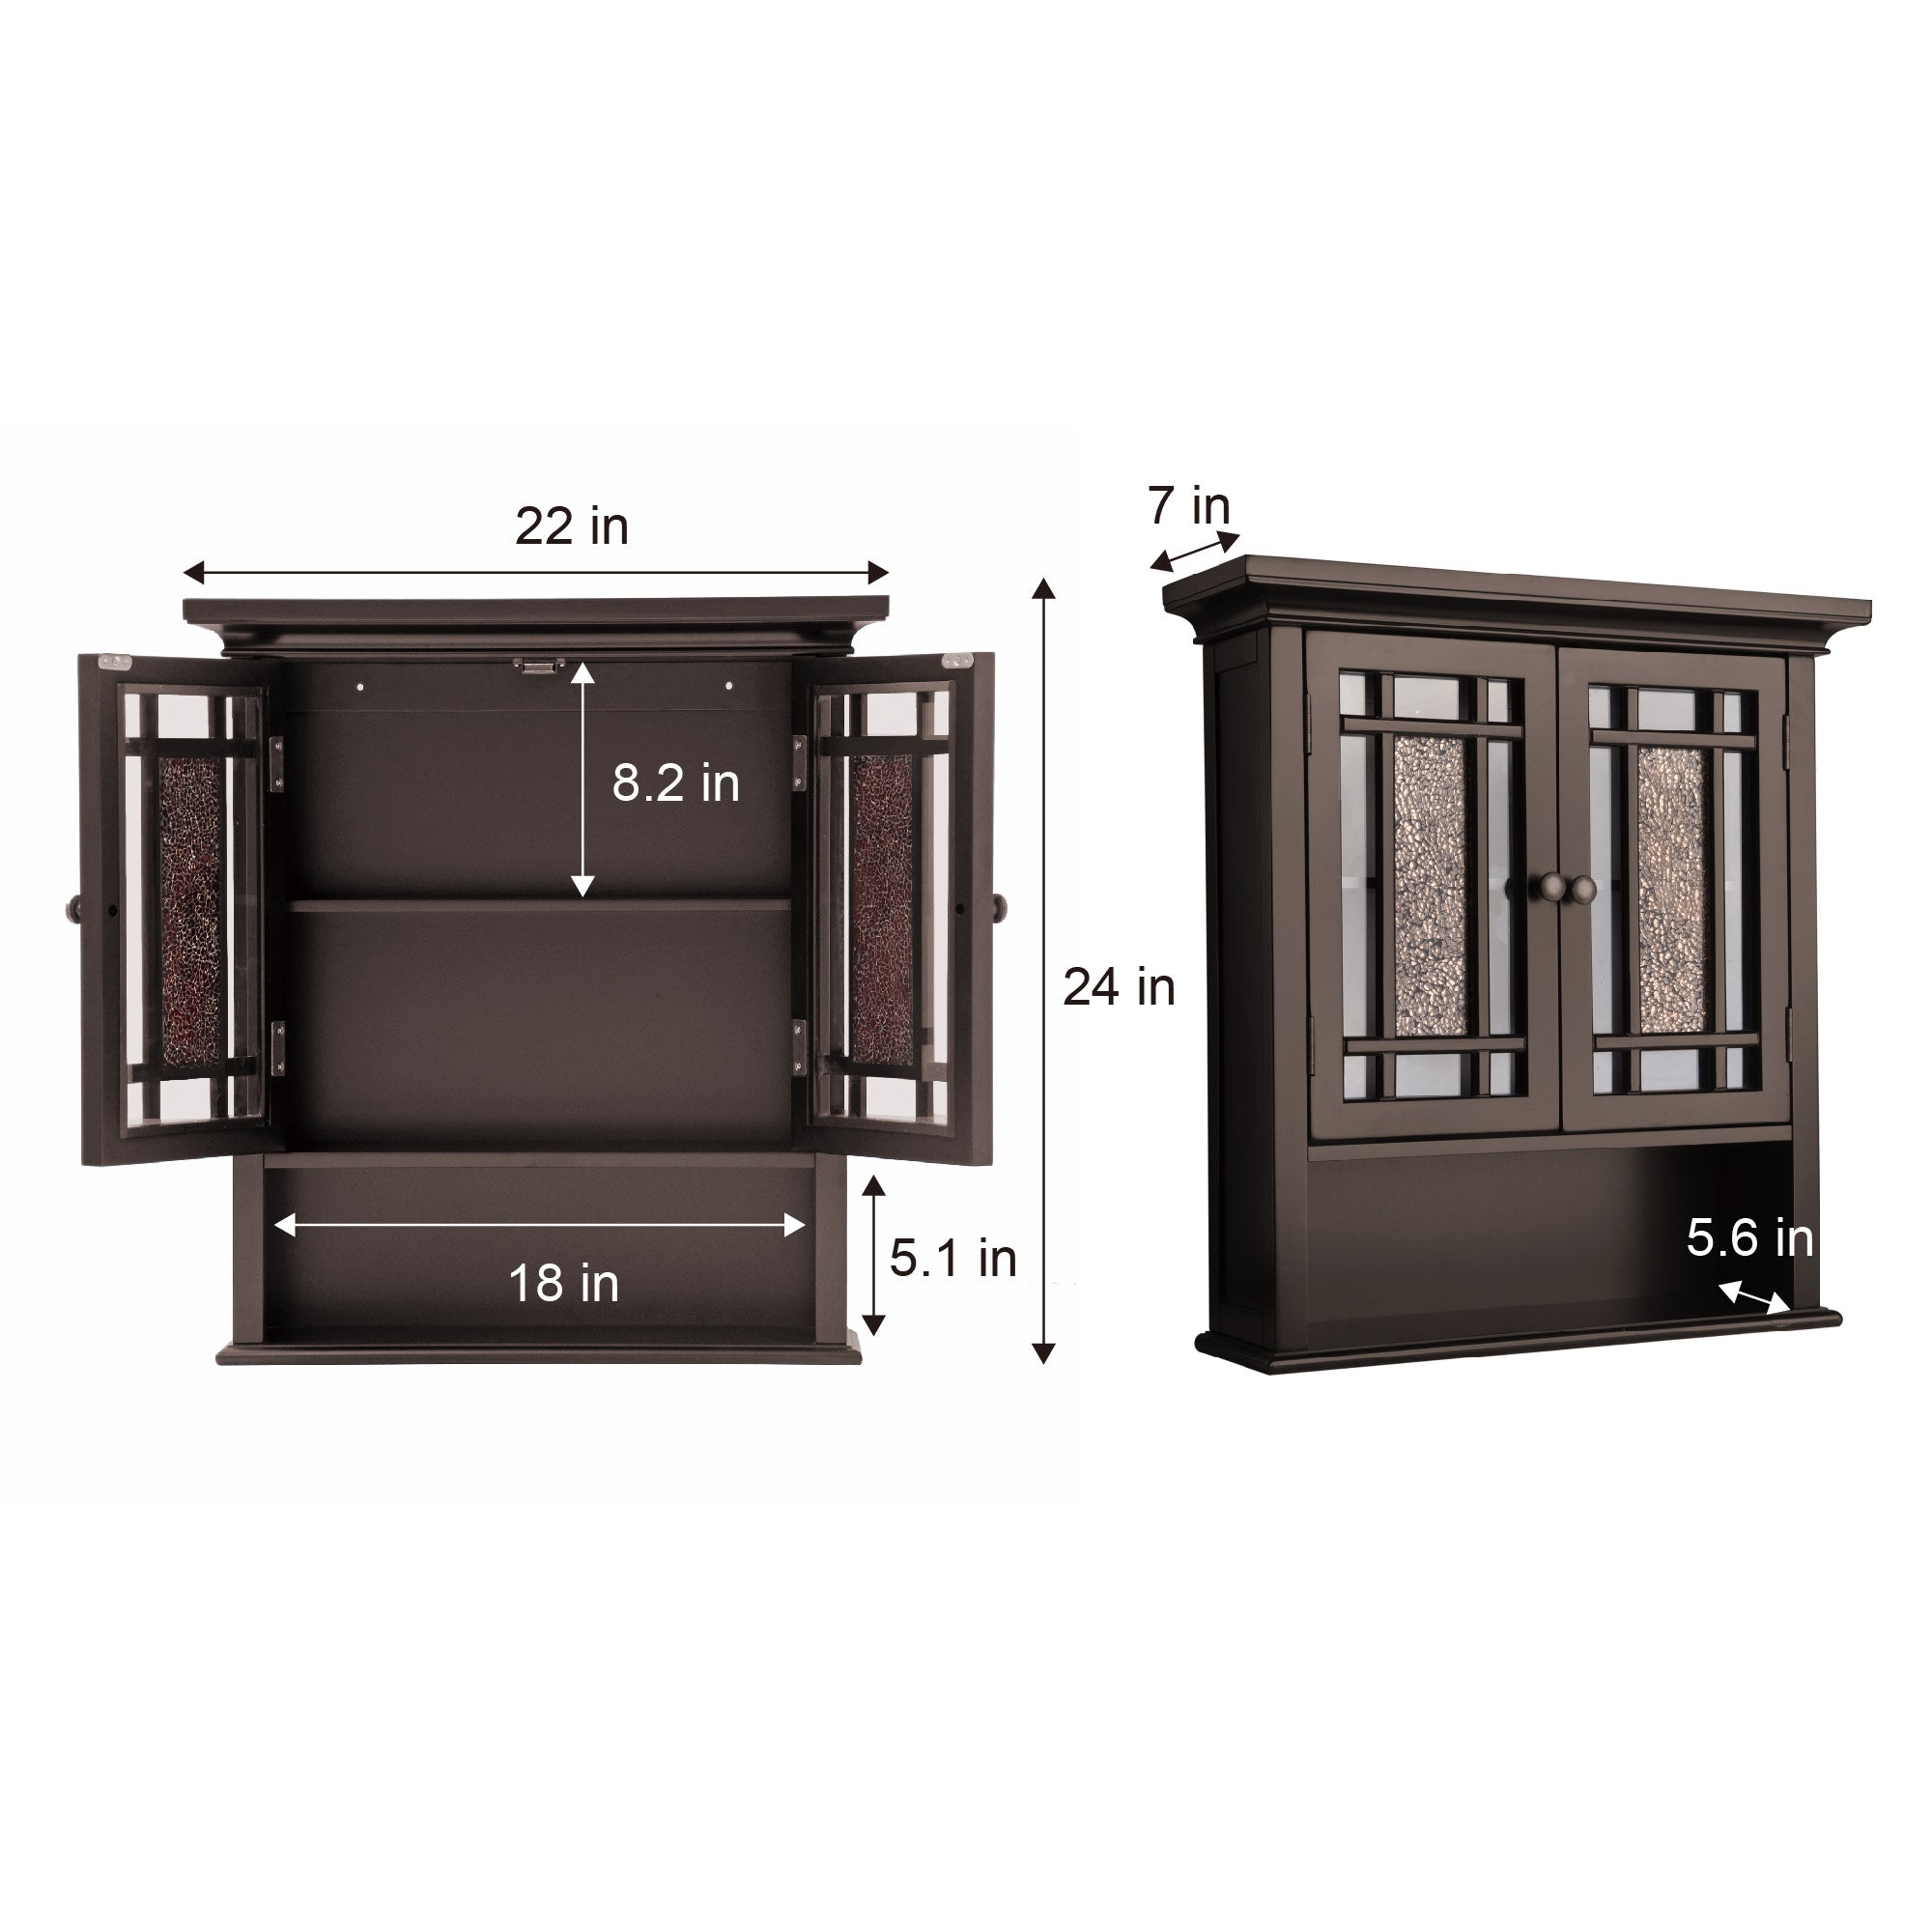 Teamson Home Windsor Removable Wooden Wall Cabinet with Glass Mosaic Doors, Dark Espresso